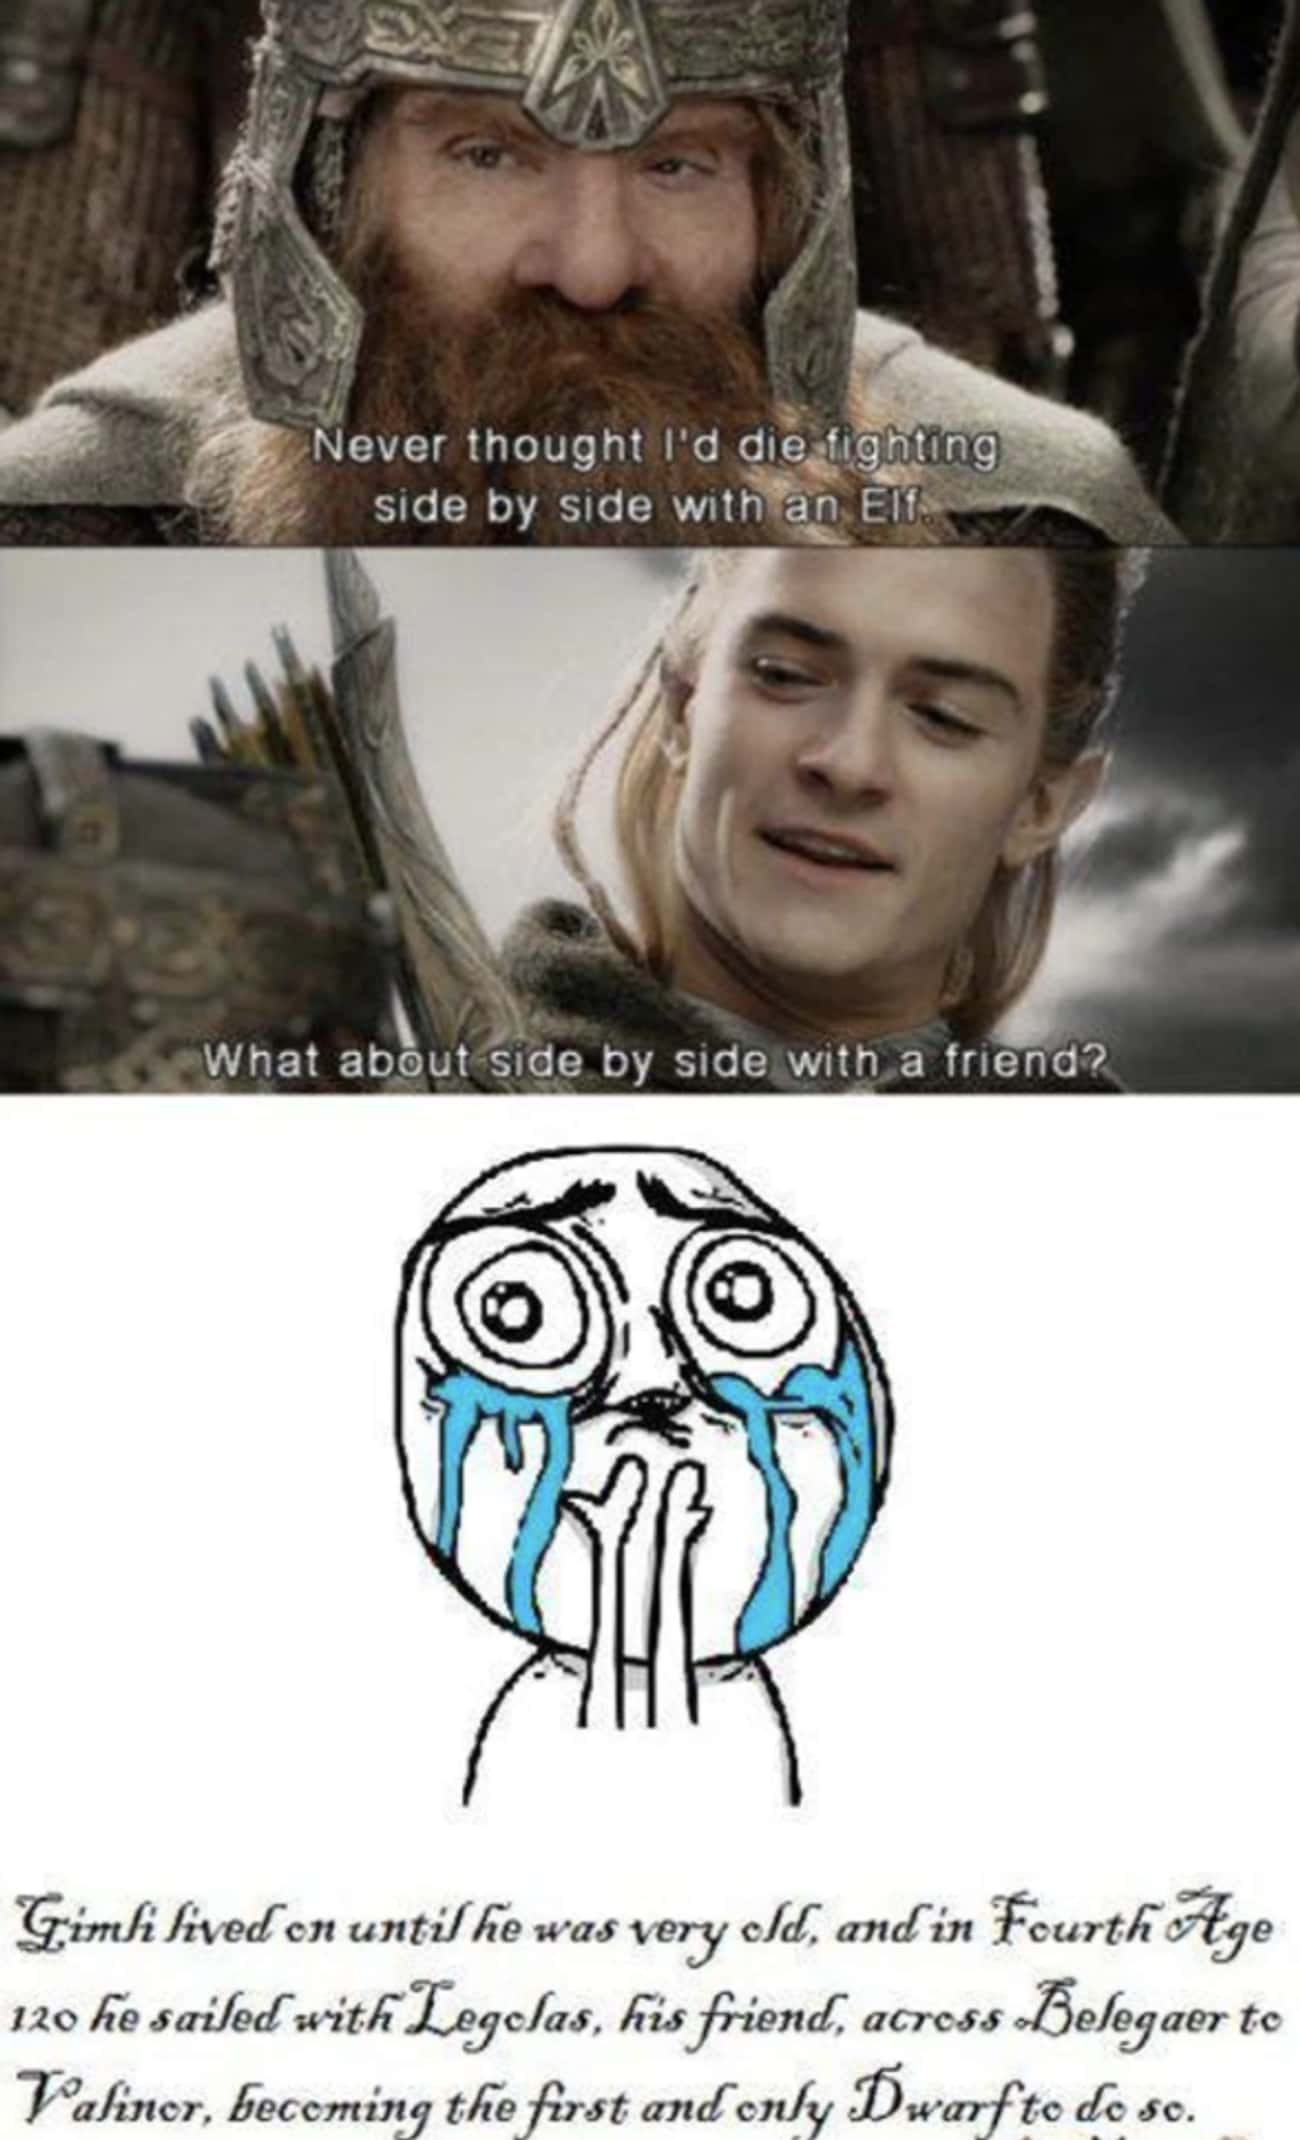 Legolas Brought Gimli To Valinor At The End Of His Life